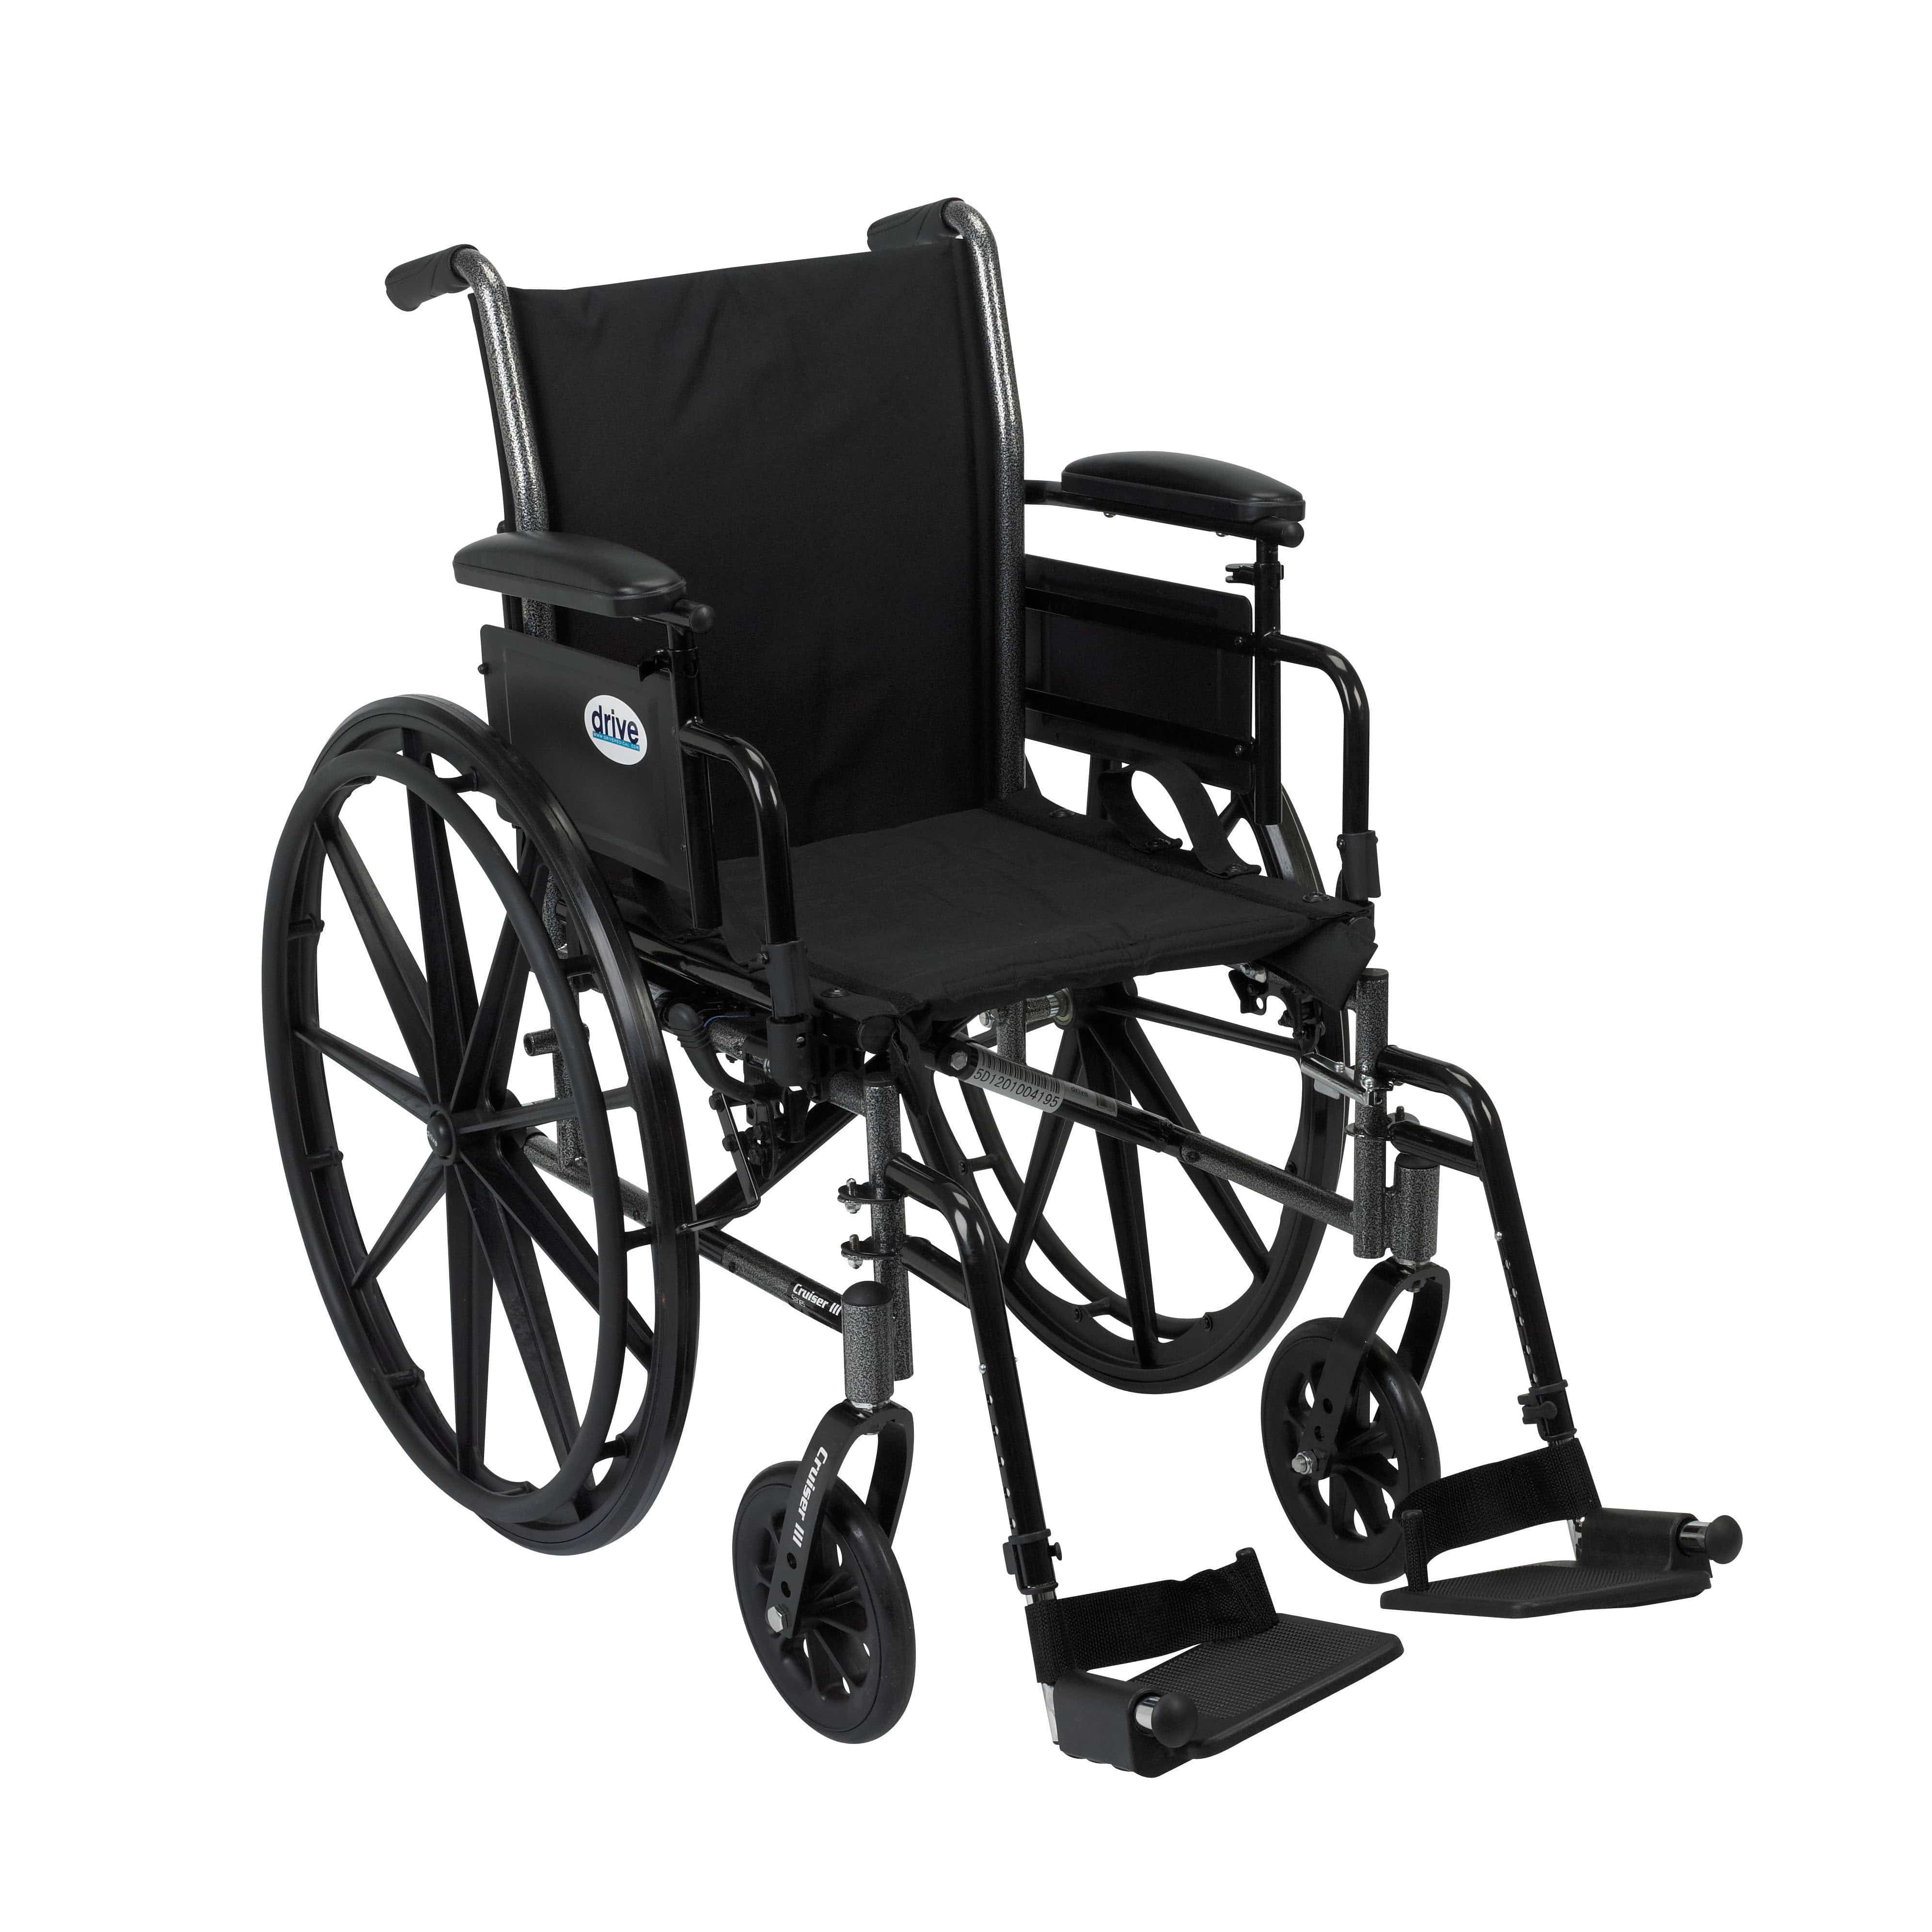 Drive Medical Wheelchairs Flip Back Removable Adjustable Height Desk Arms and Swing away Footrests / 16" Seat Drive Medical Cruiser III Light Weight Wheelchair with Flip Back Removable Arms